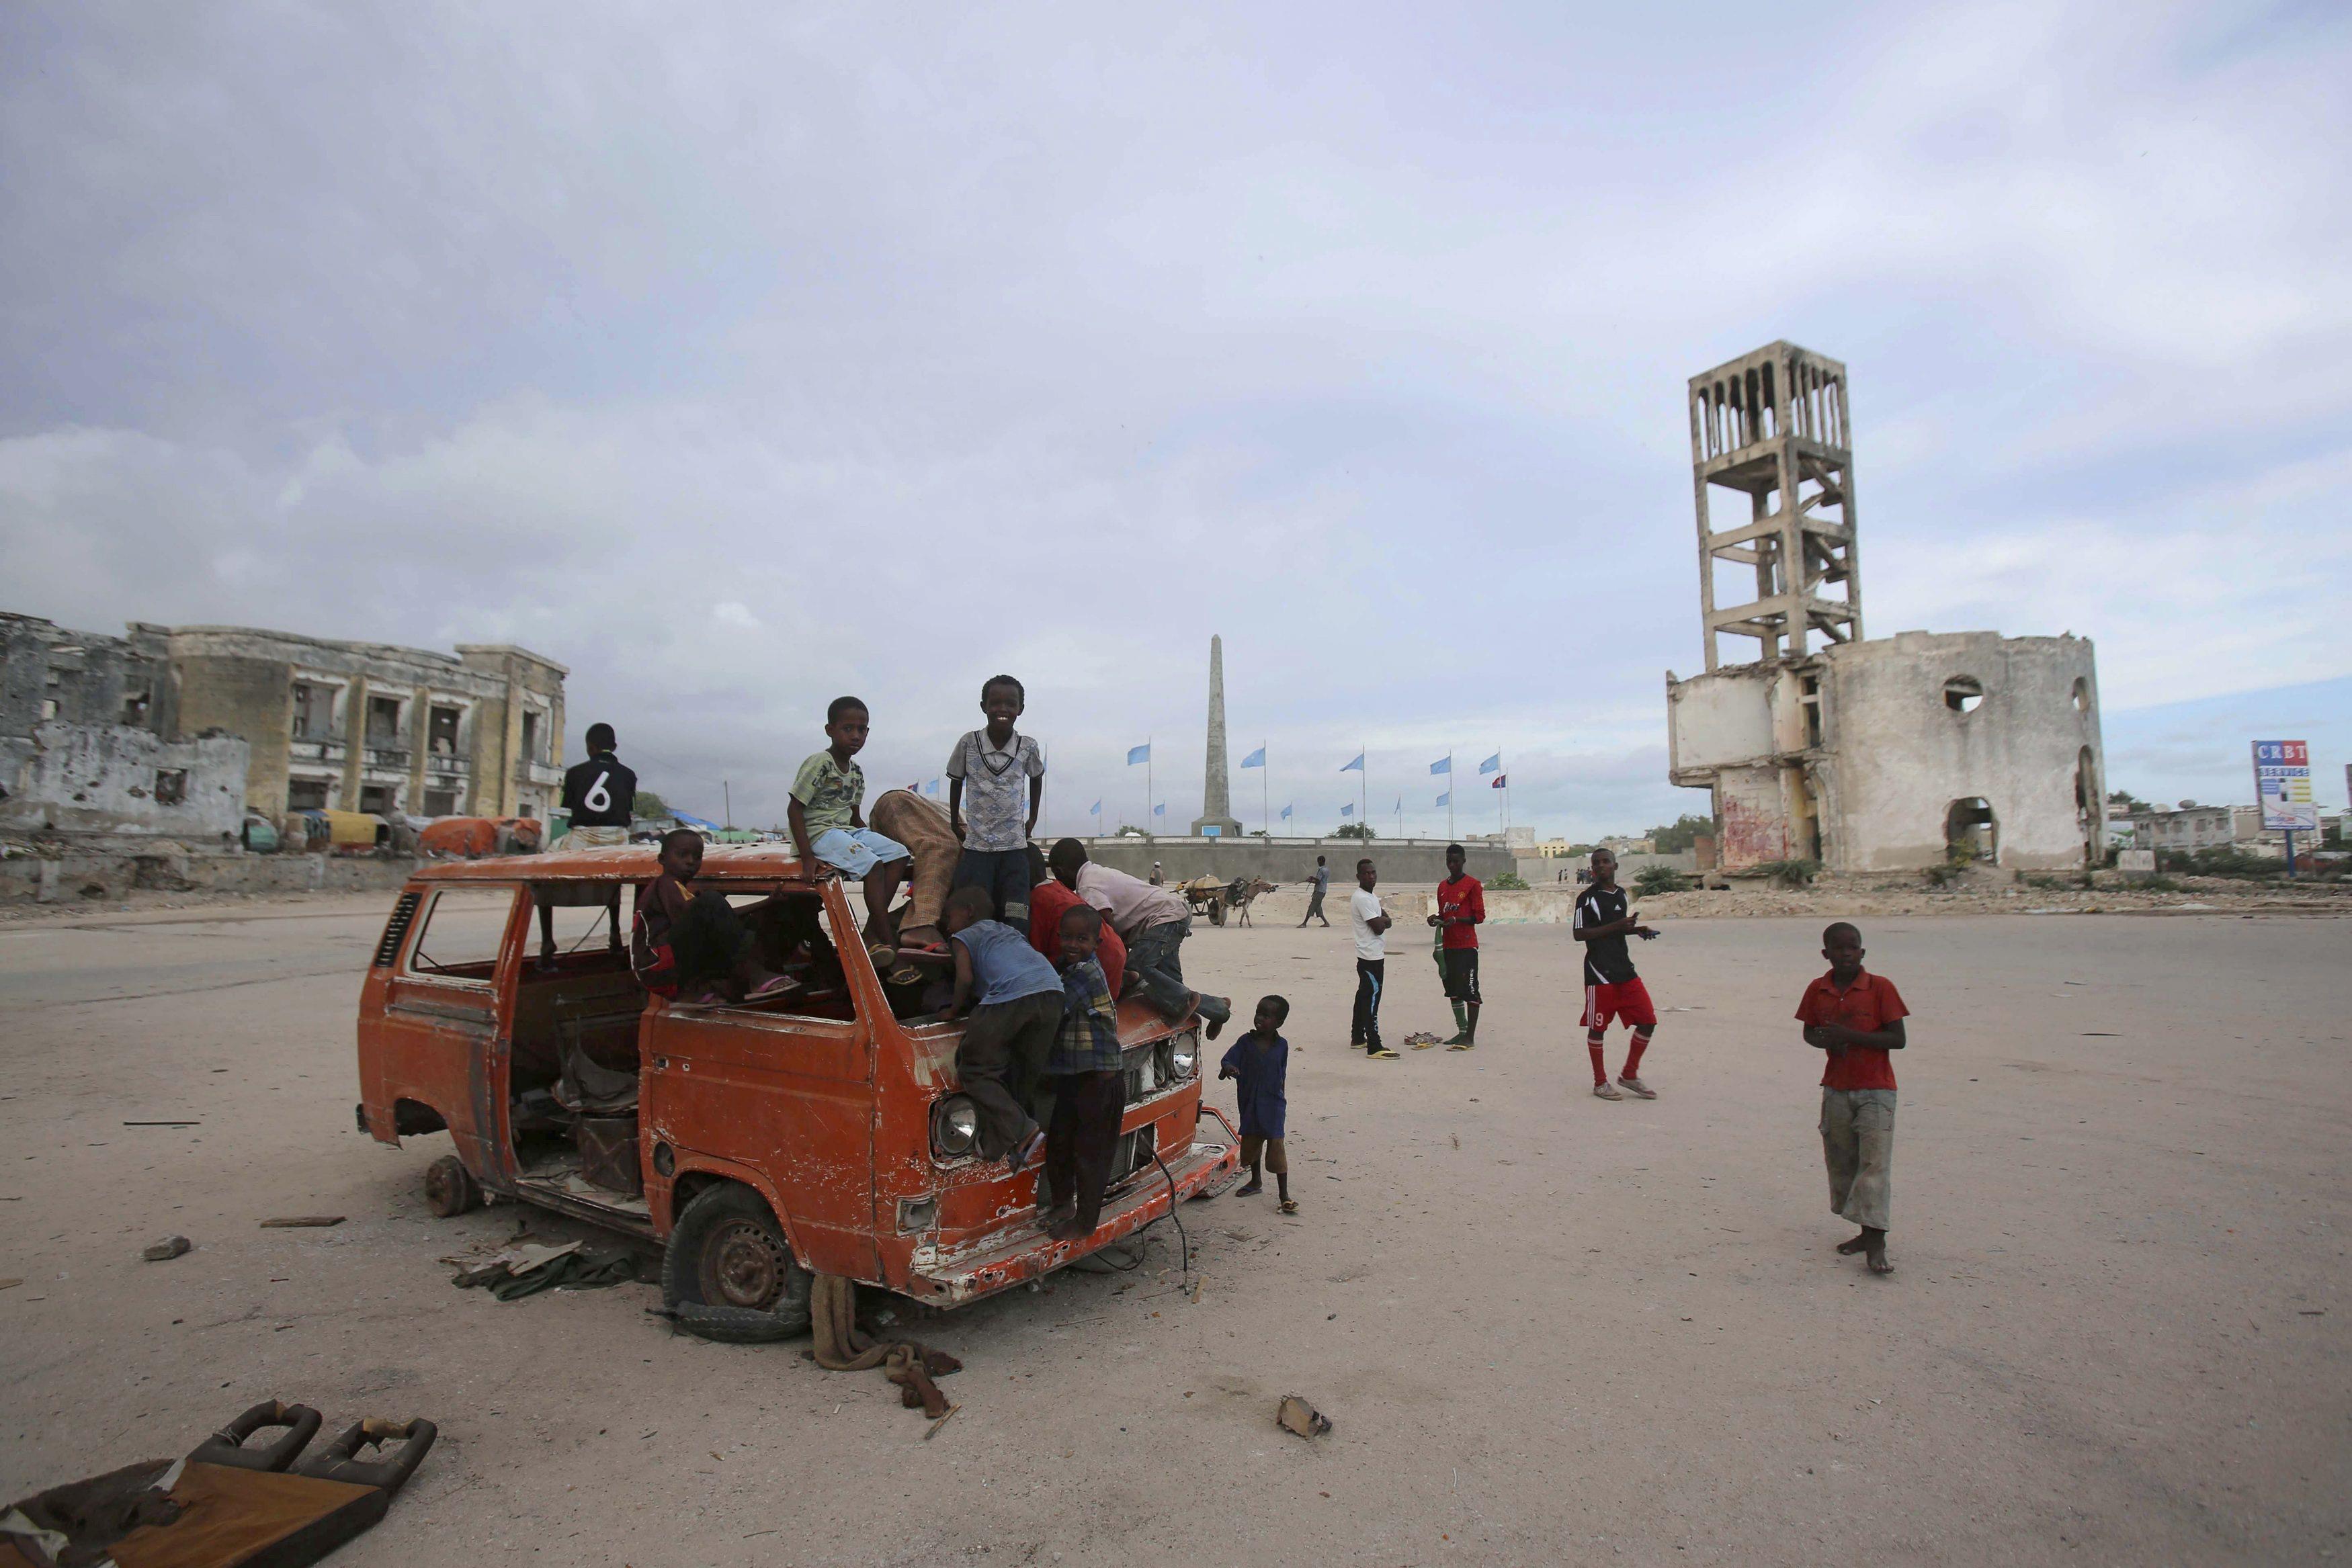 Children play on an abandoned truck in front of the destroyed former parliament building in Mogadish